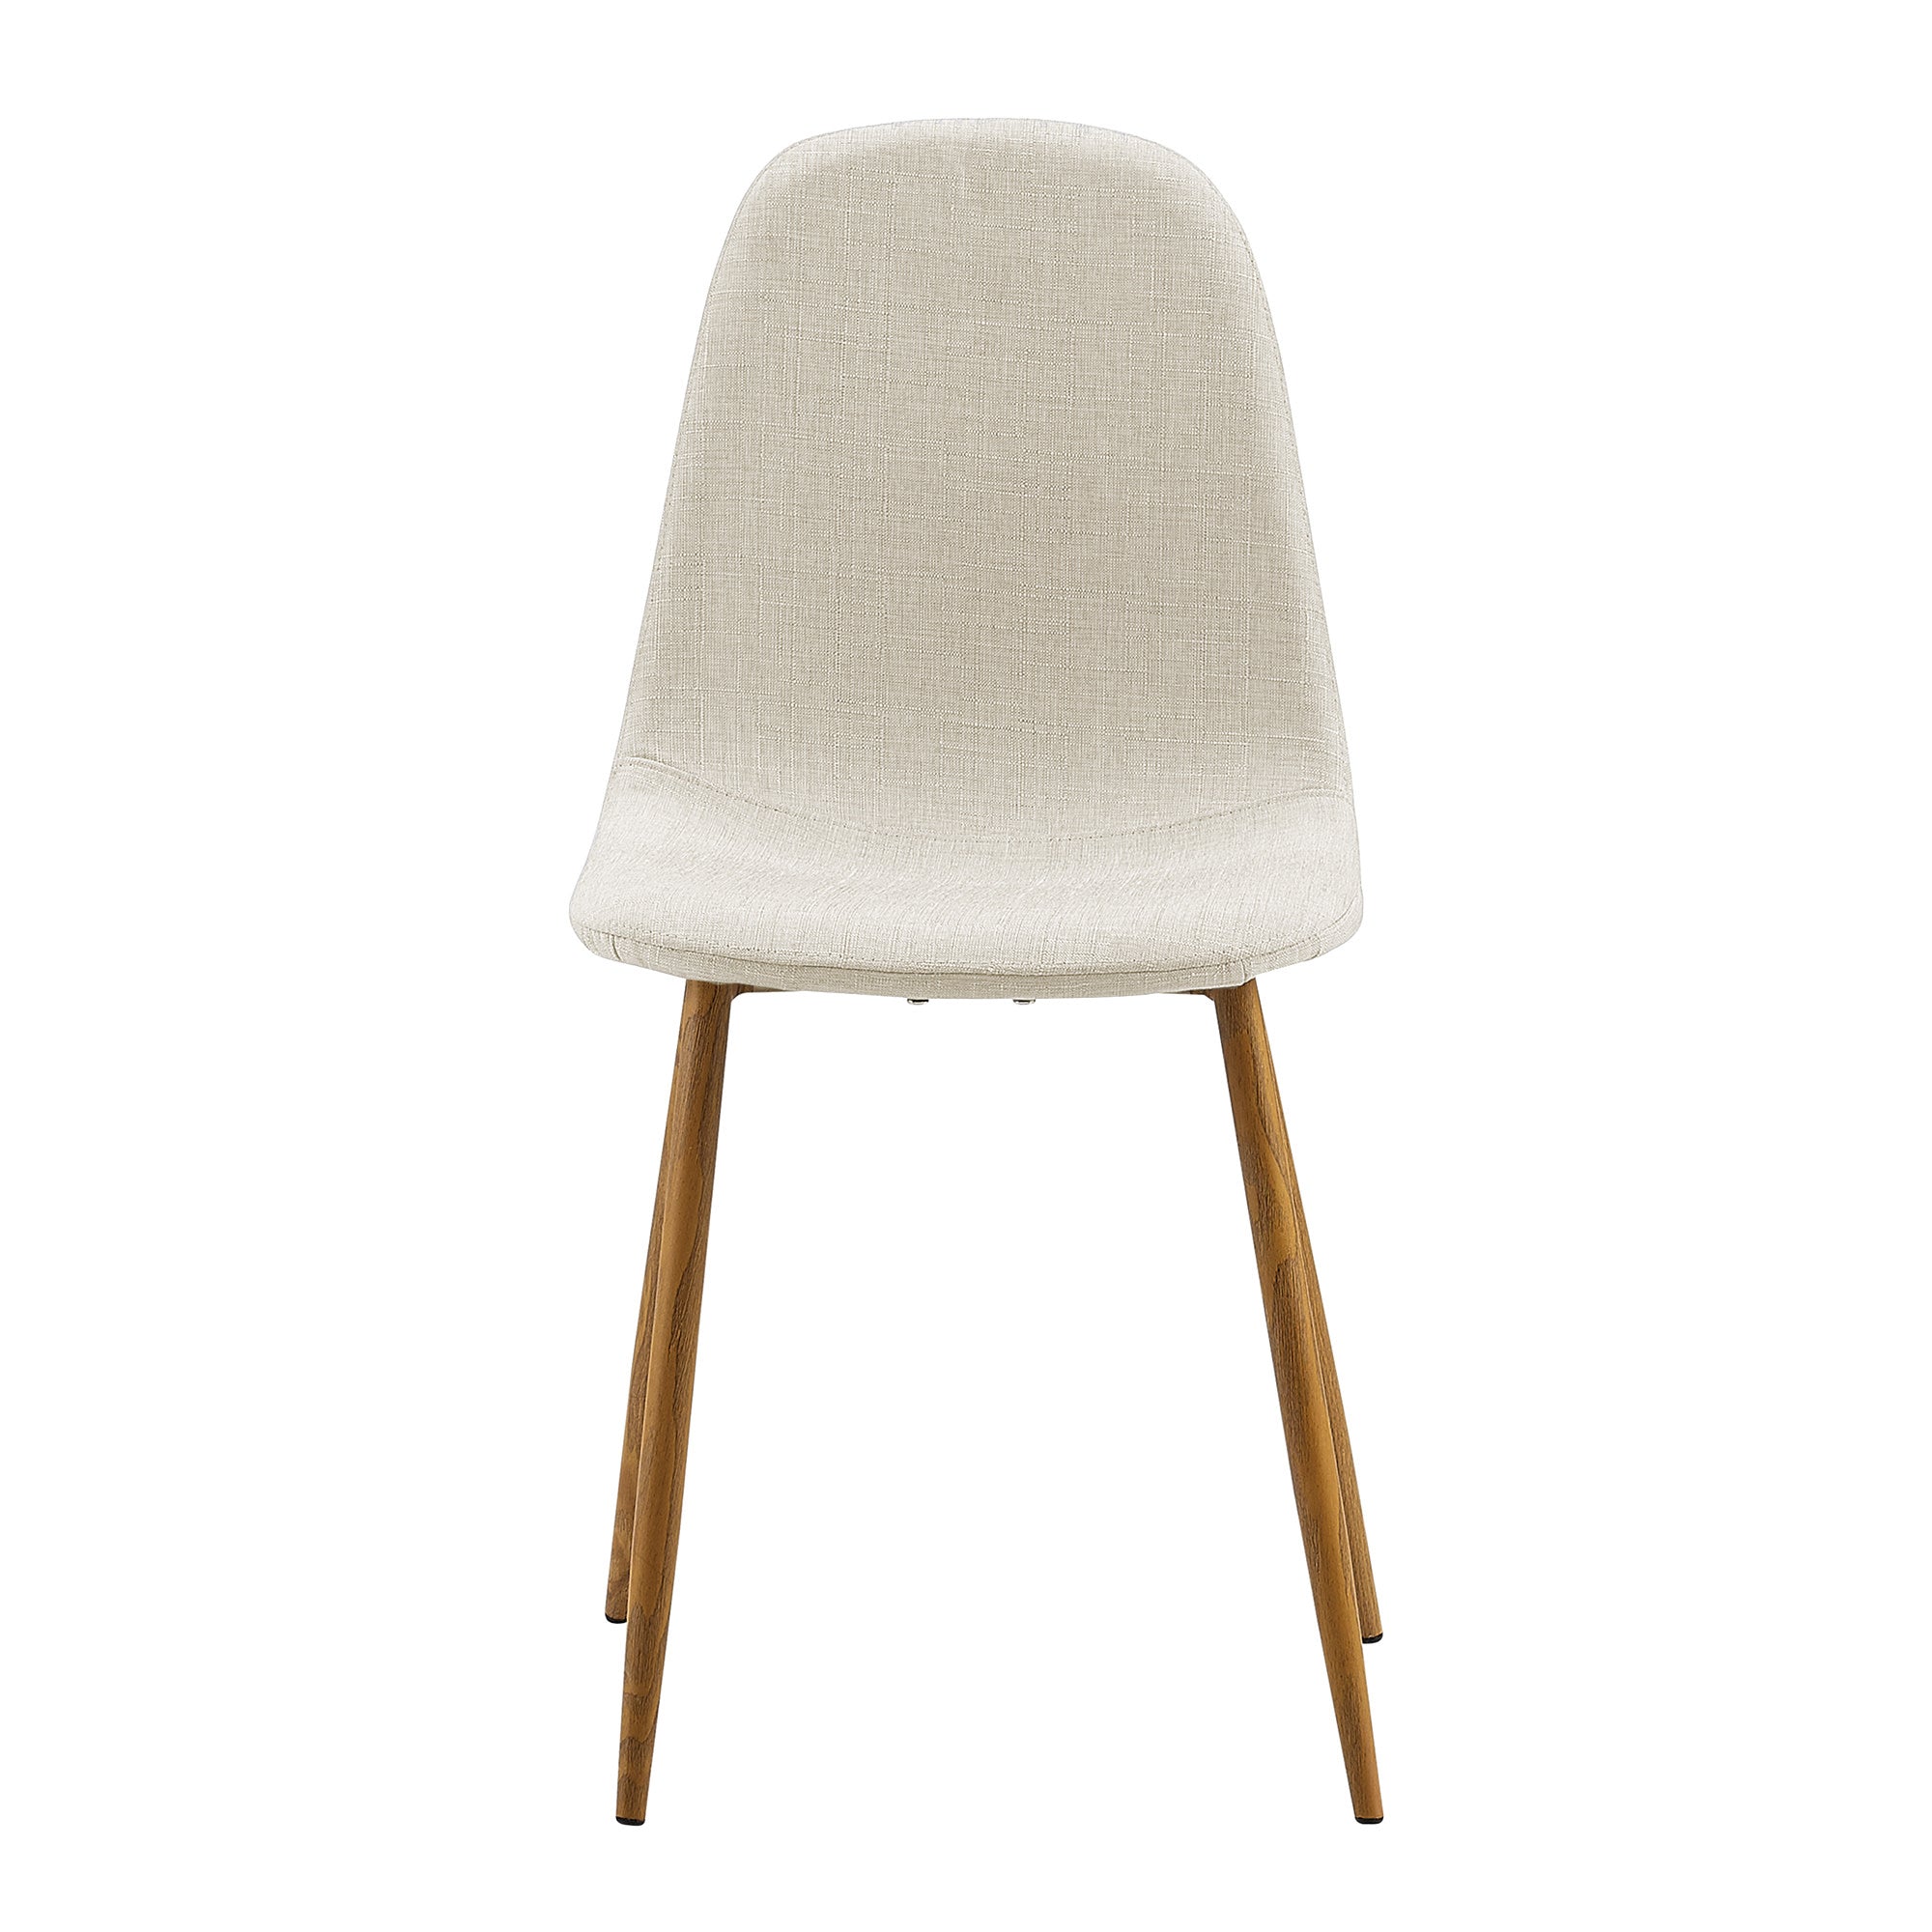 Teamson Home Minimalista Fabric Dining Chair with Wood Grain Metal Legs, Set of 2, White/Natural